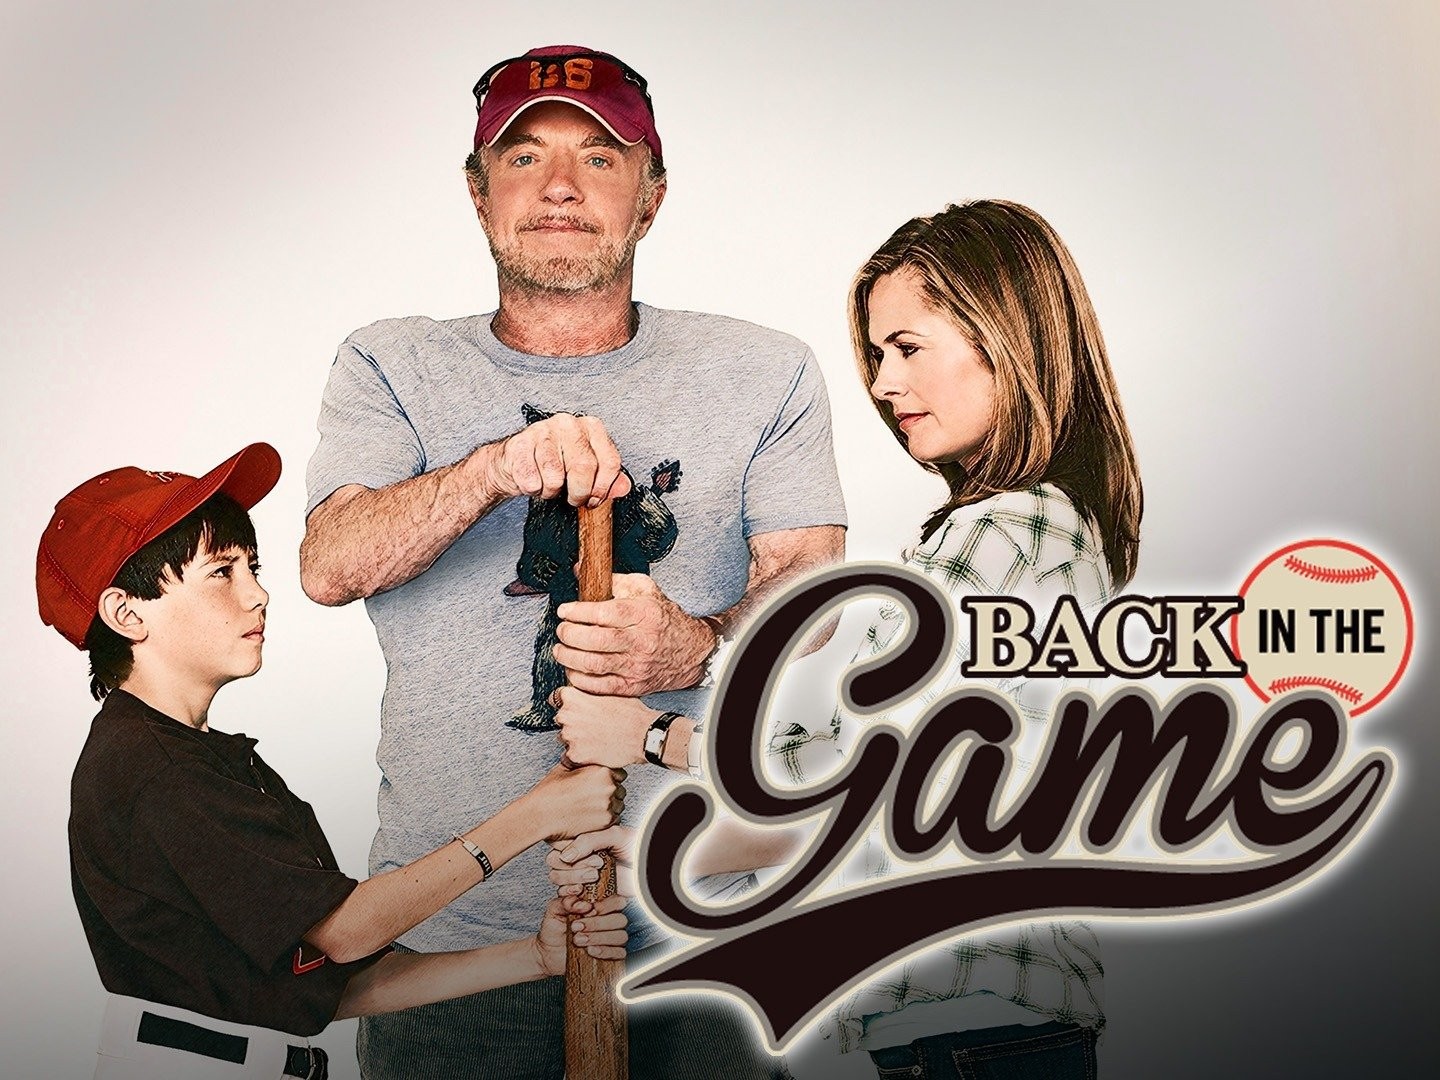 Back in the Game TV show premiere ratings